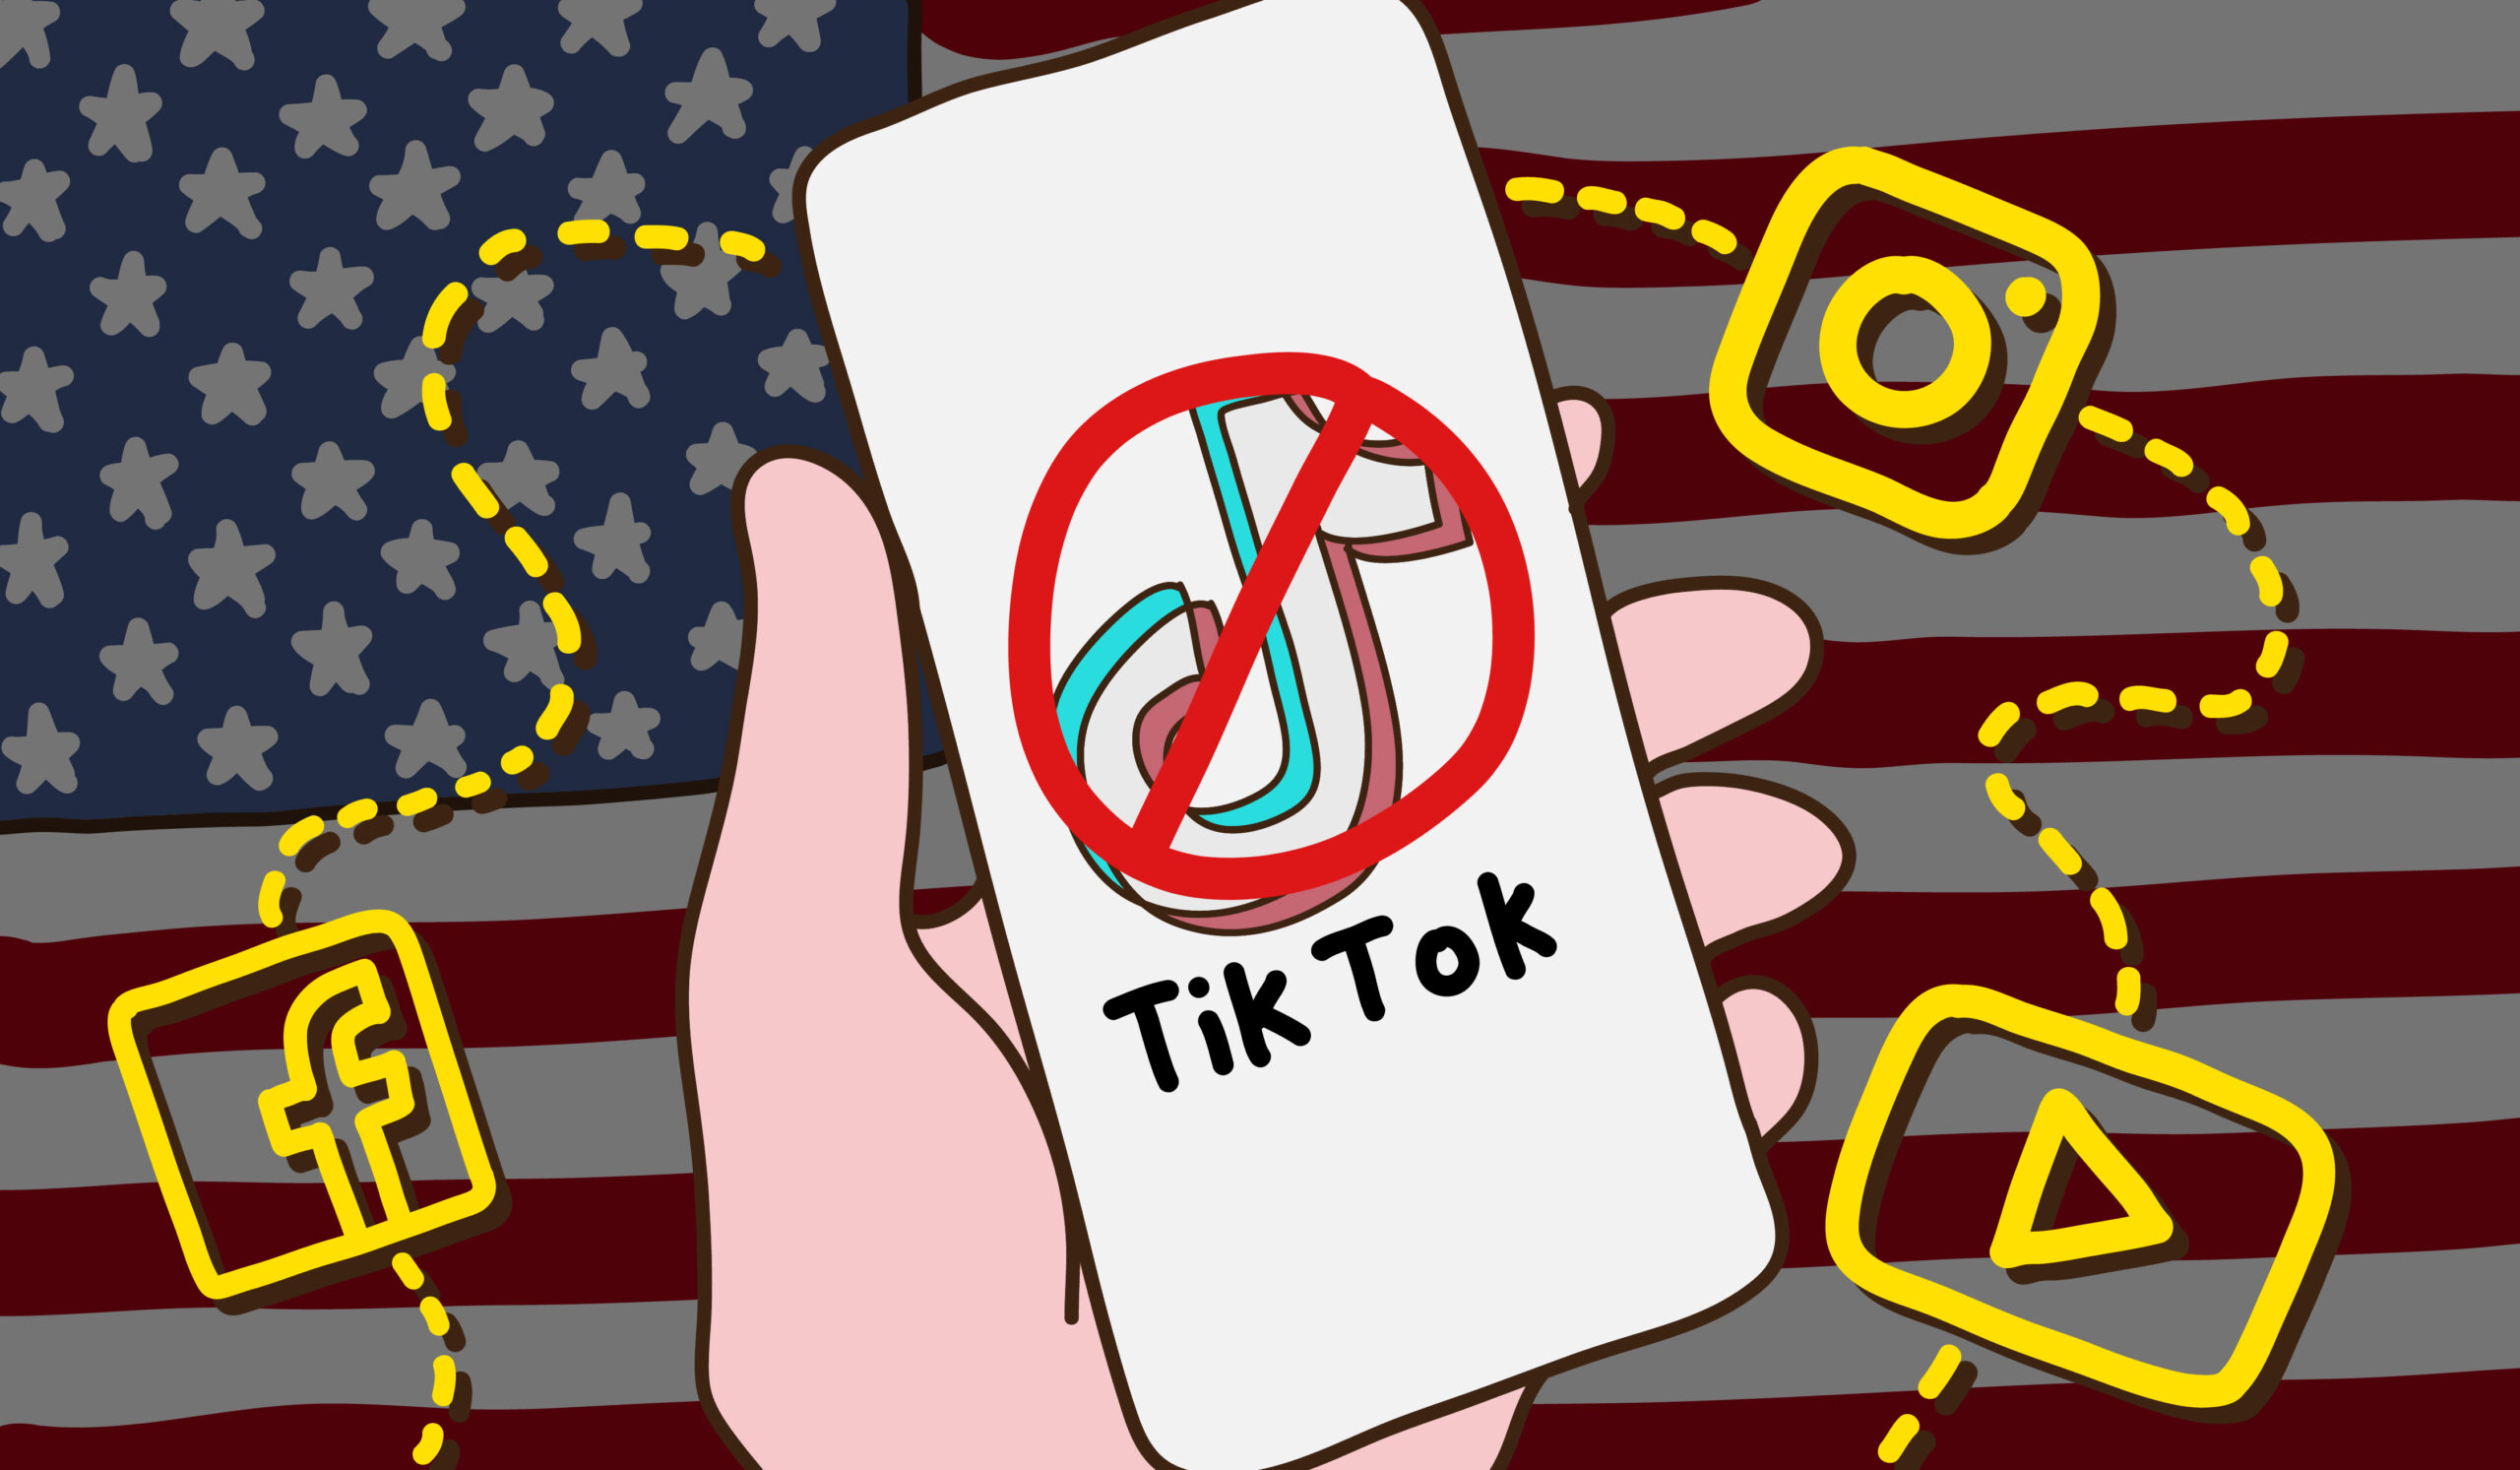 A picture of a hand holding a phone with an "X" through the TikTok logo hero.